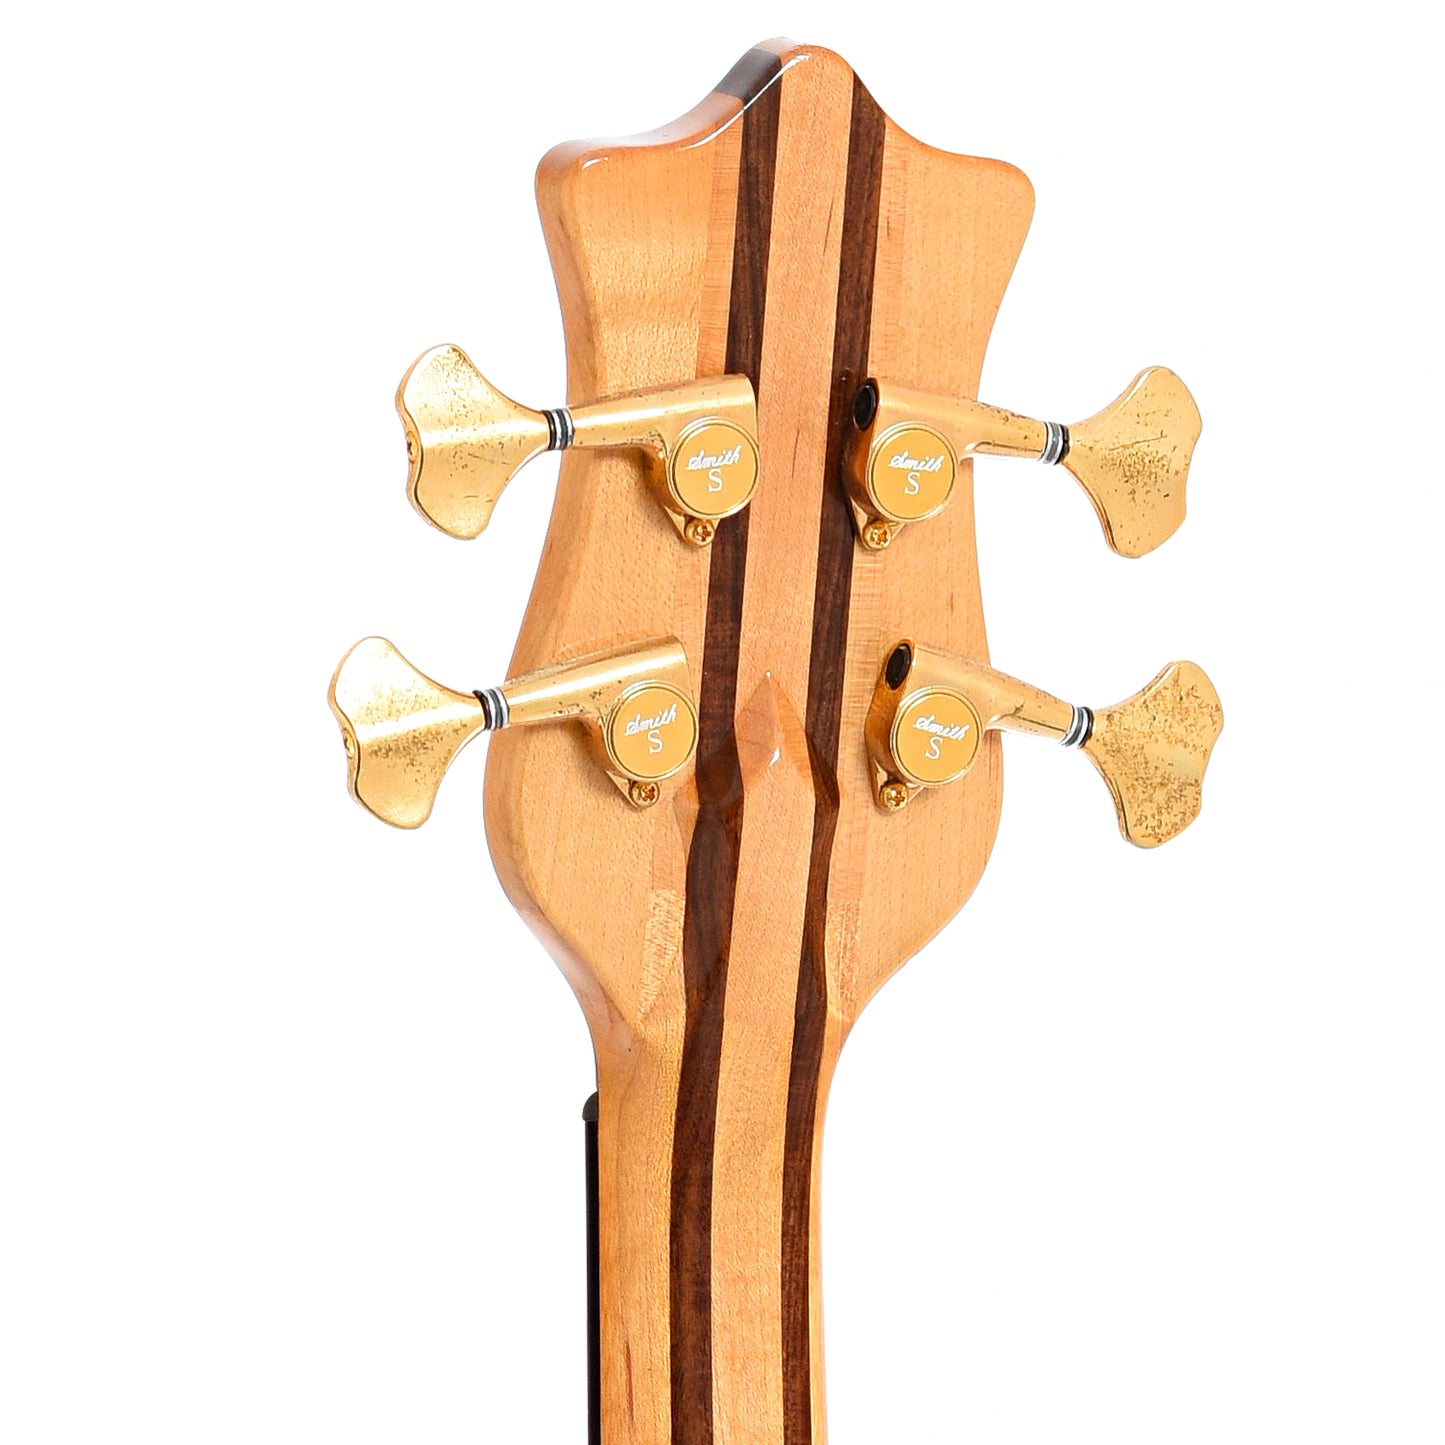 Back headstock of Ken Smith BSR4 Elite 4-String Electric Bass